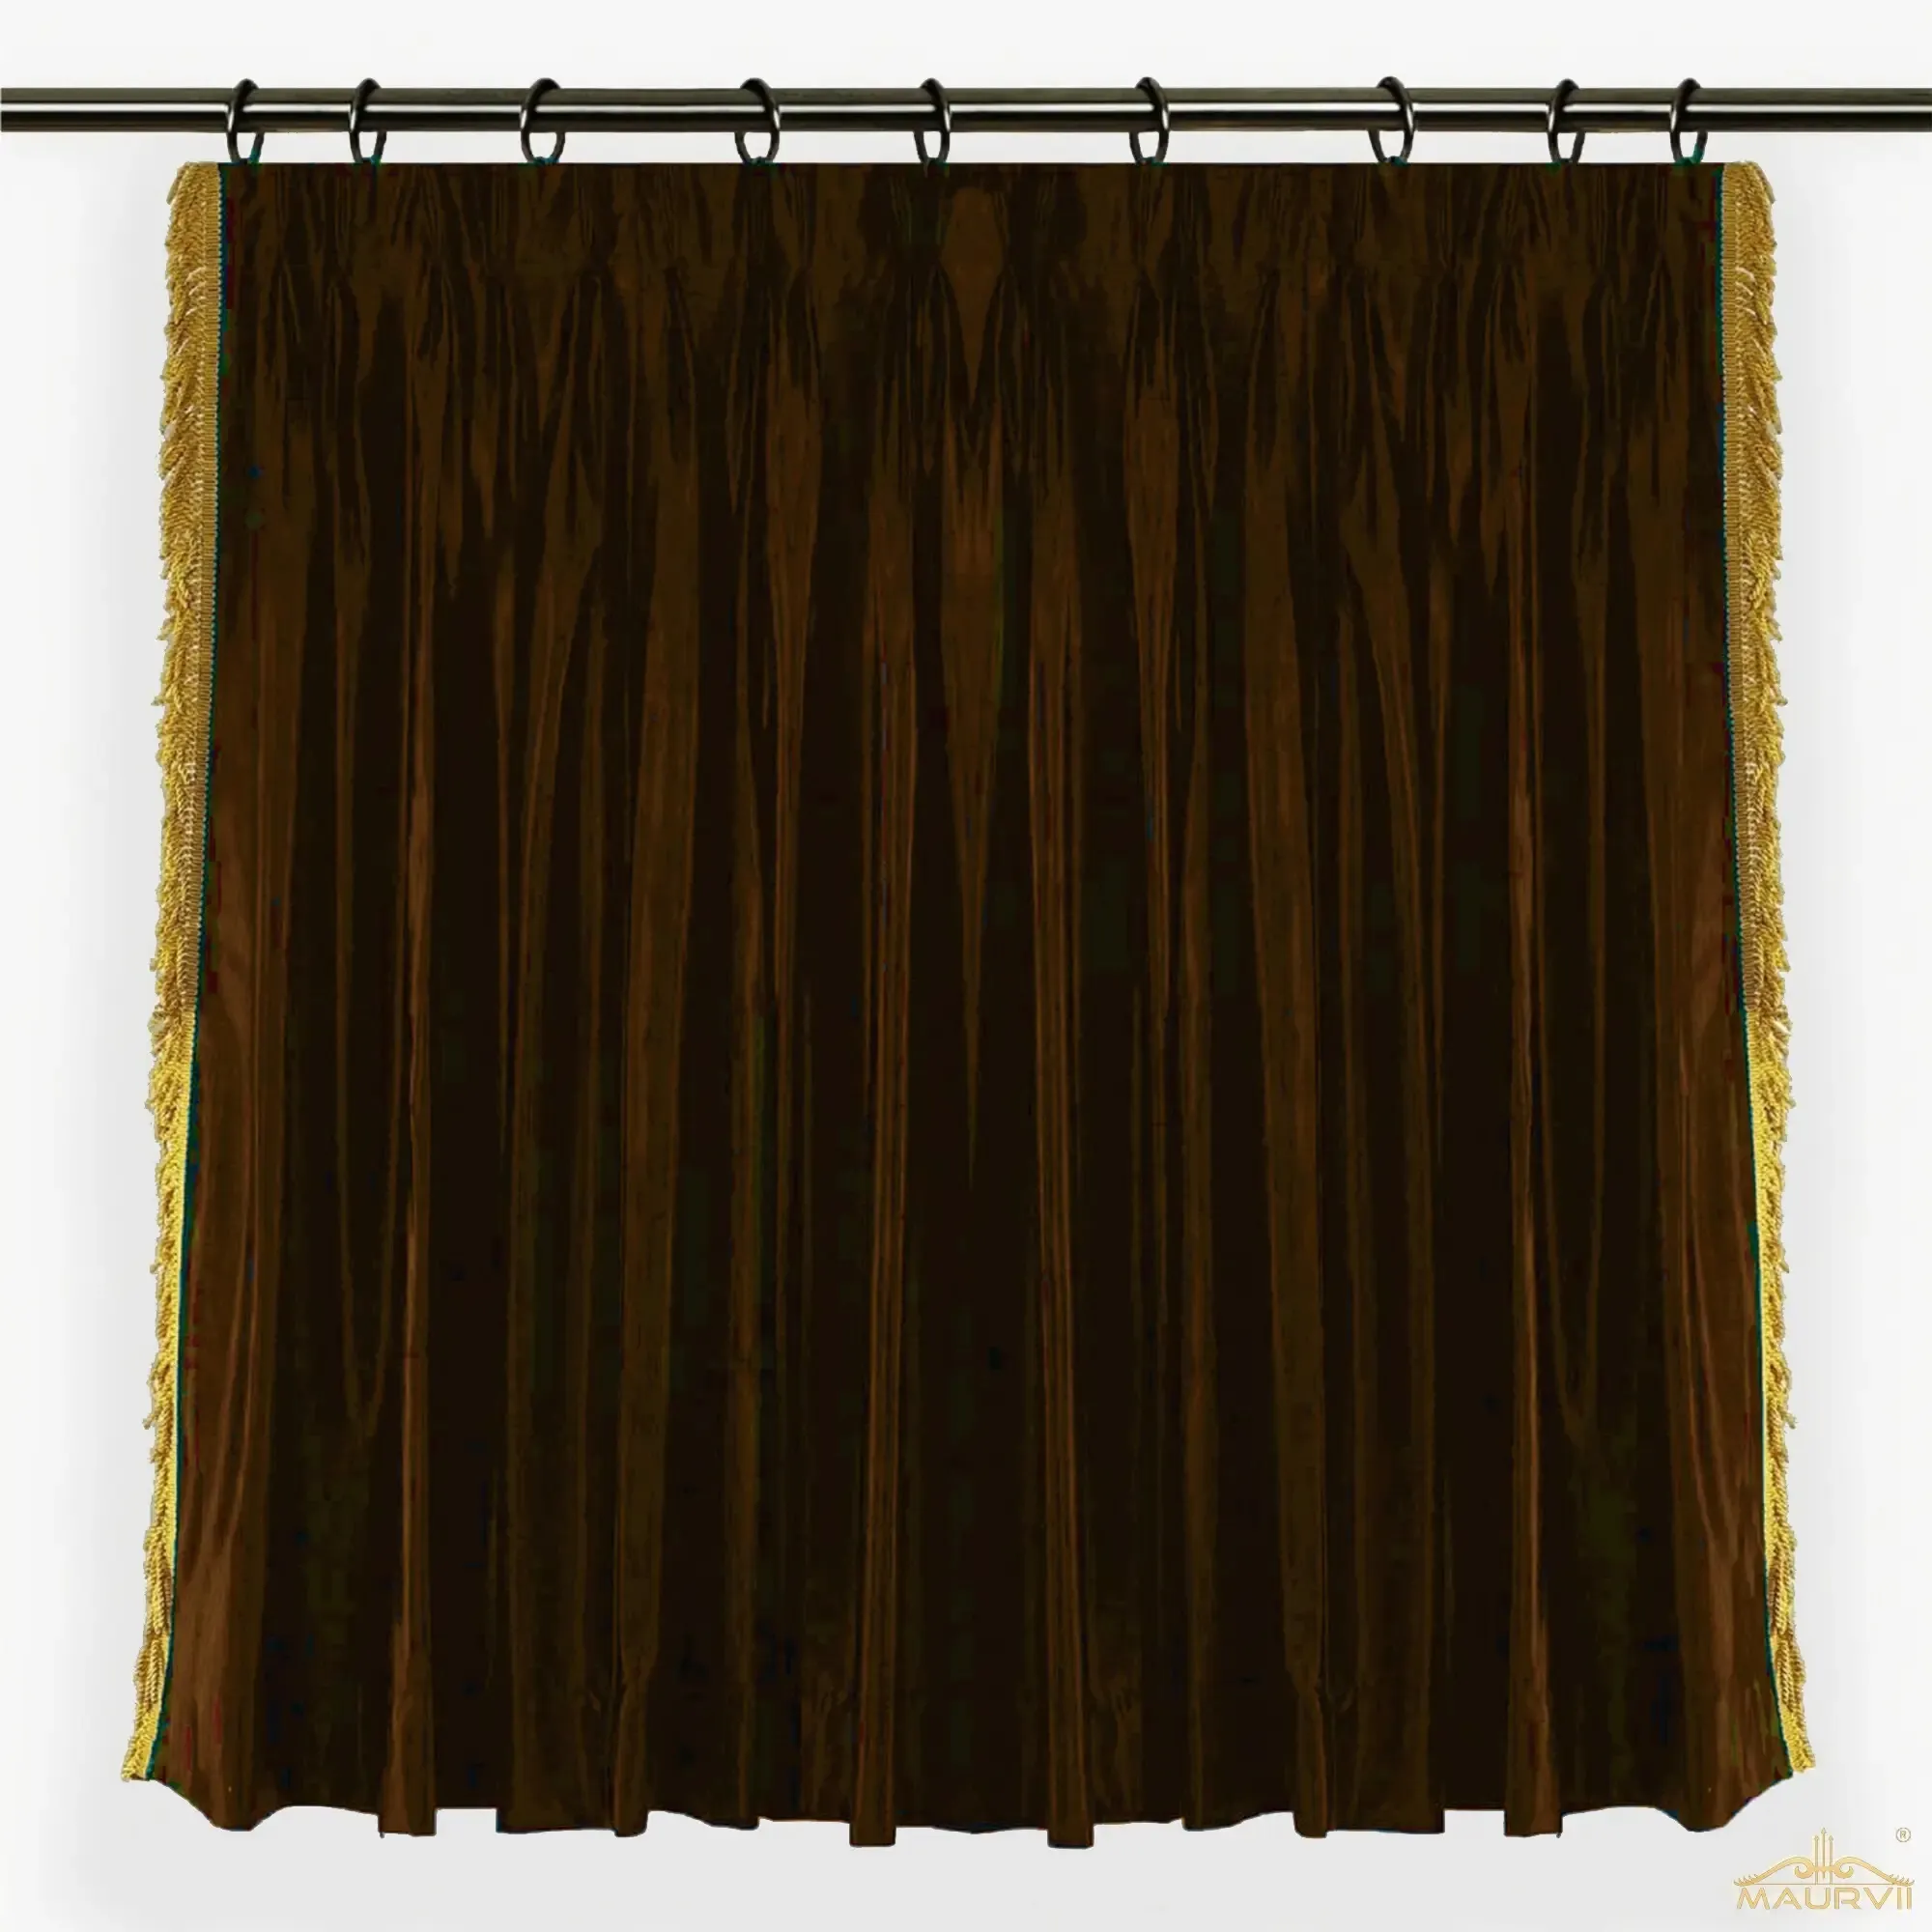 Brown stage curtains